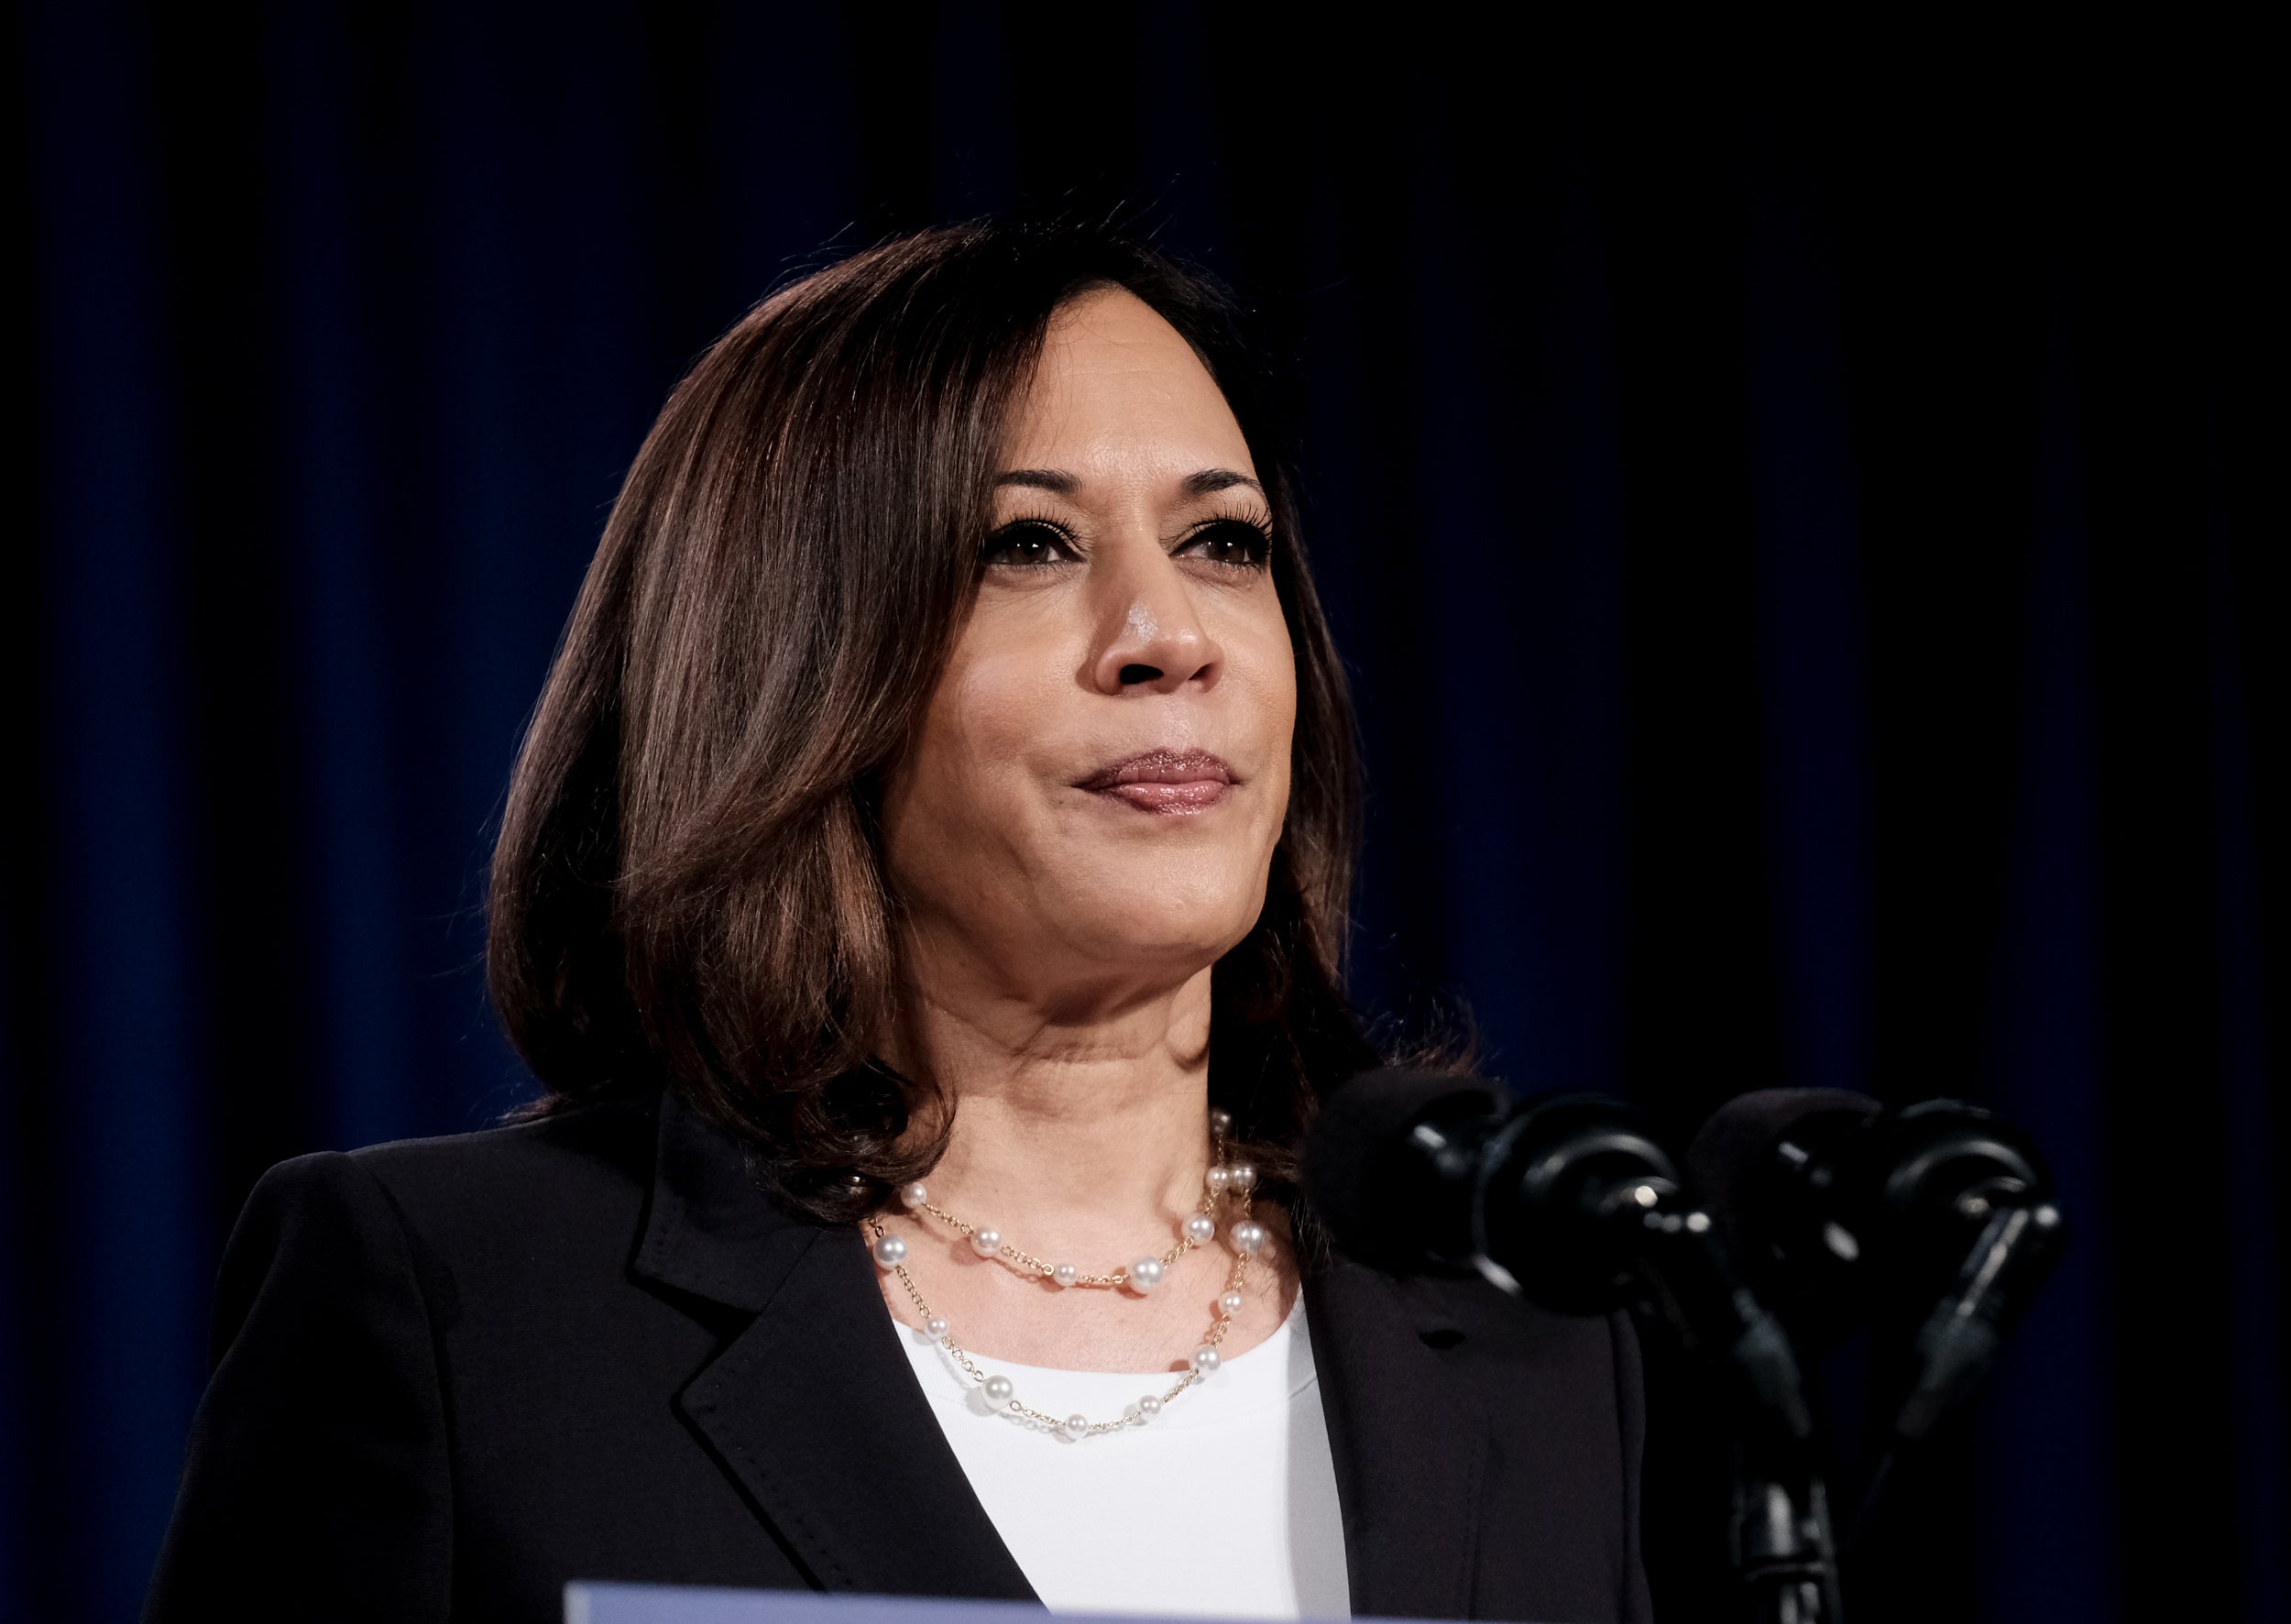 How Kamala Harris As Vice President Can Lead An Agenda Addressing And Reforming Systemic Racial Injustice